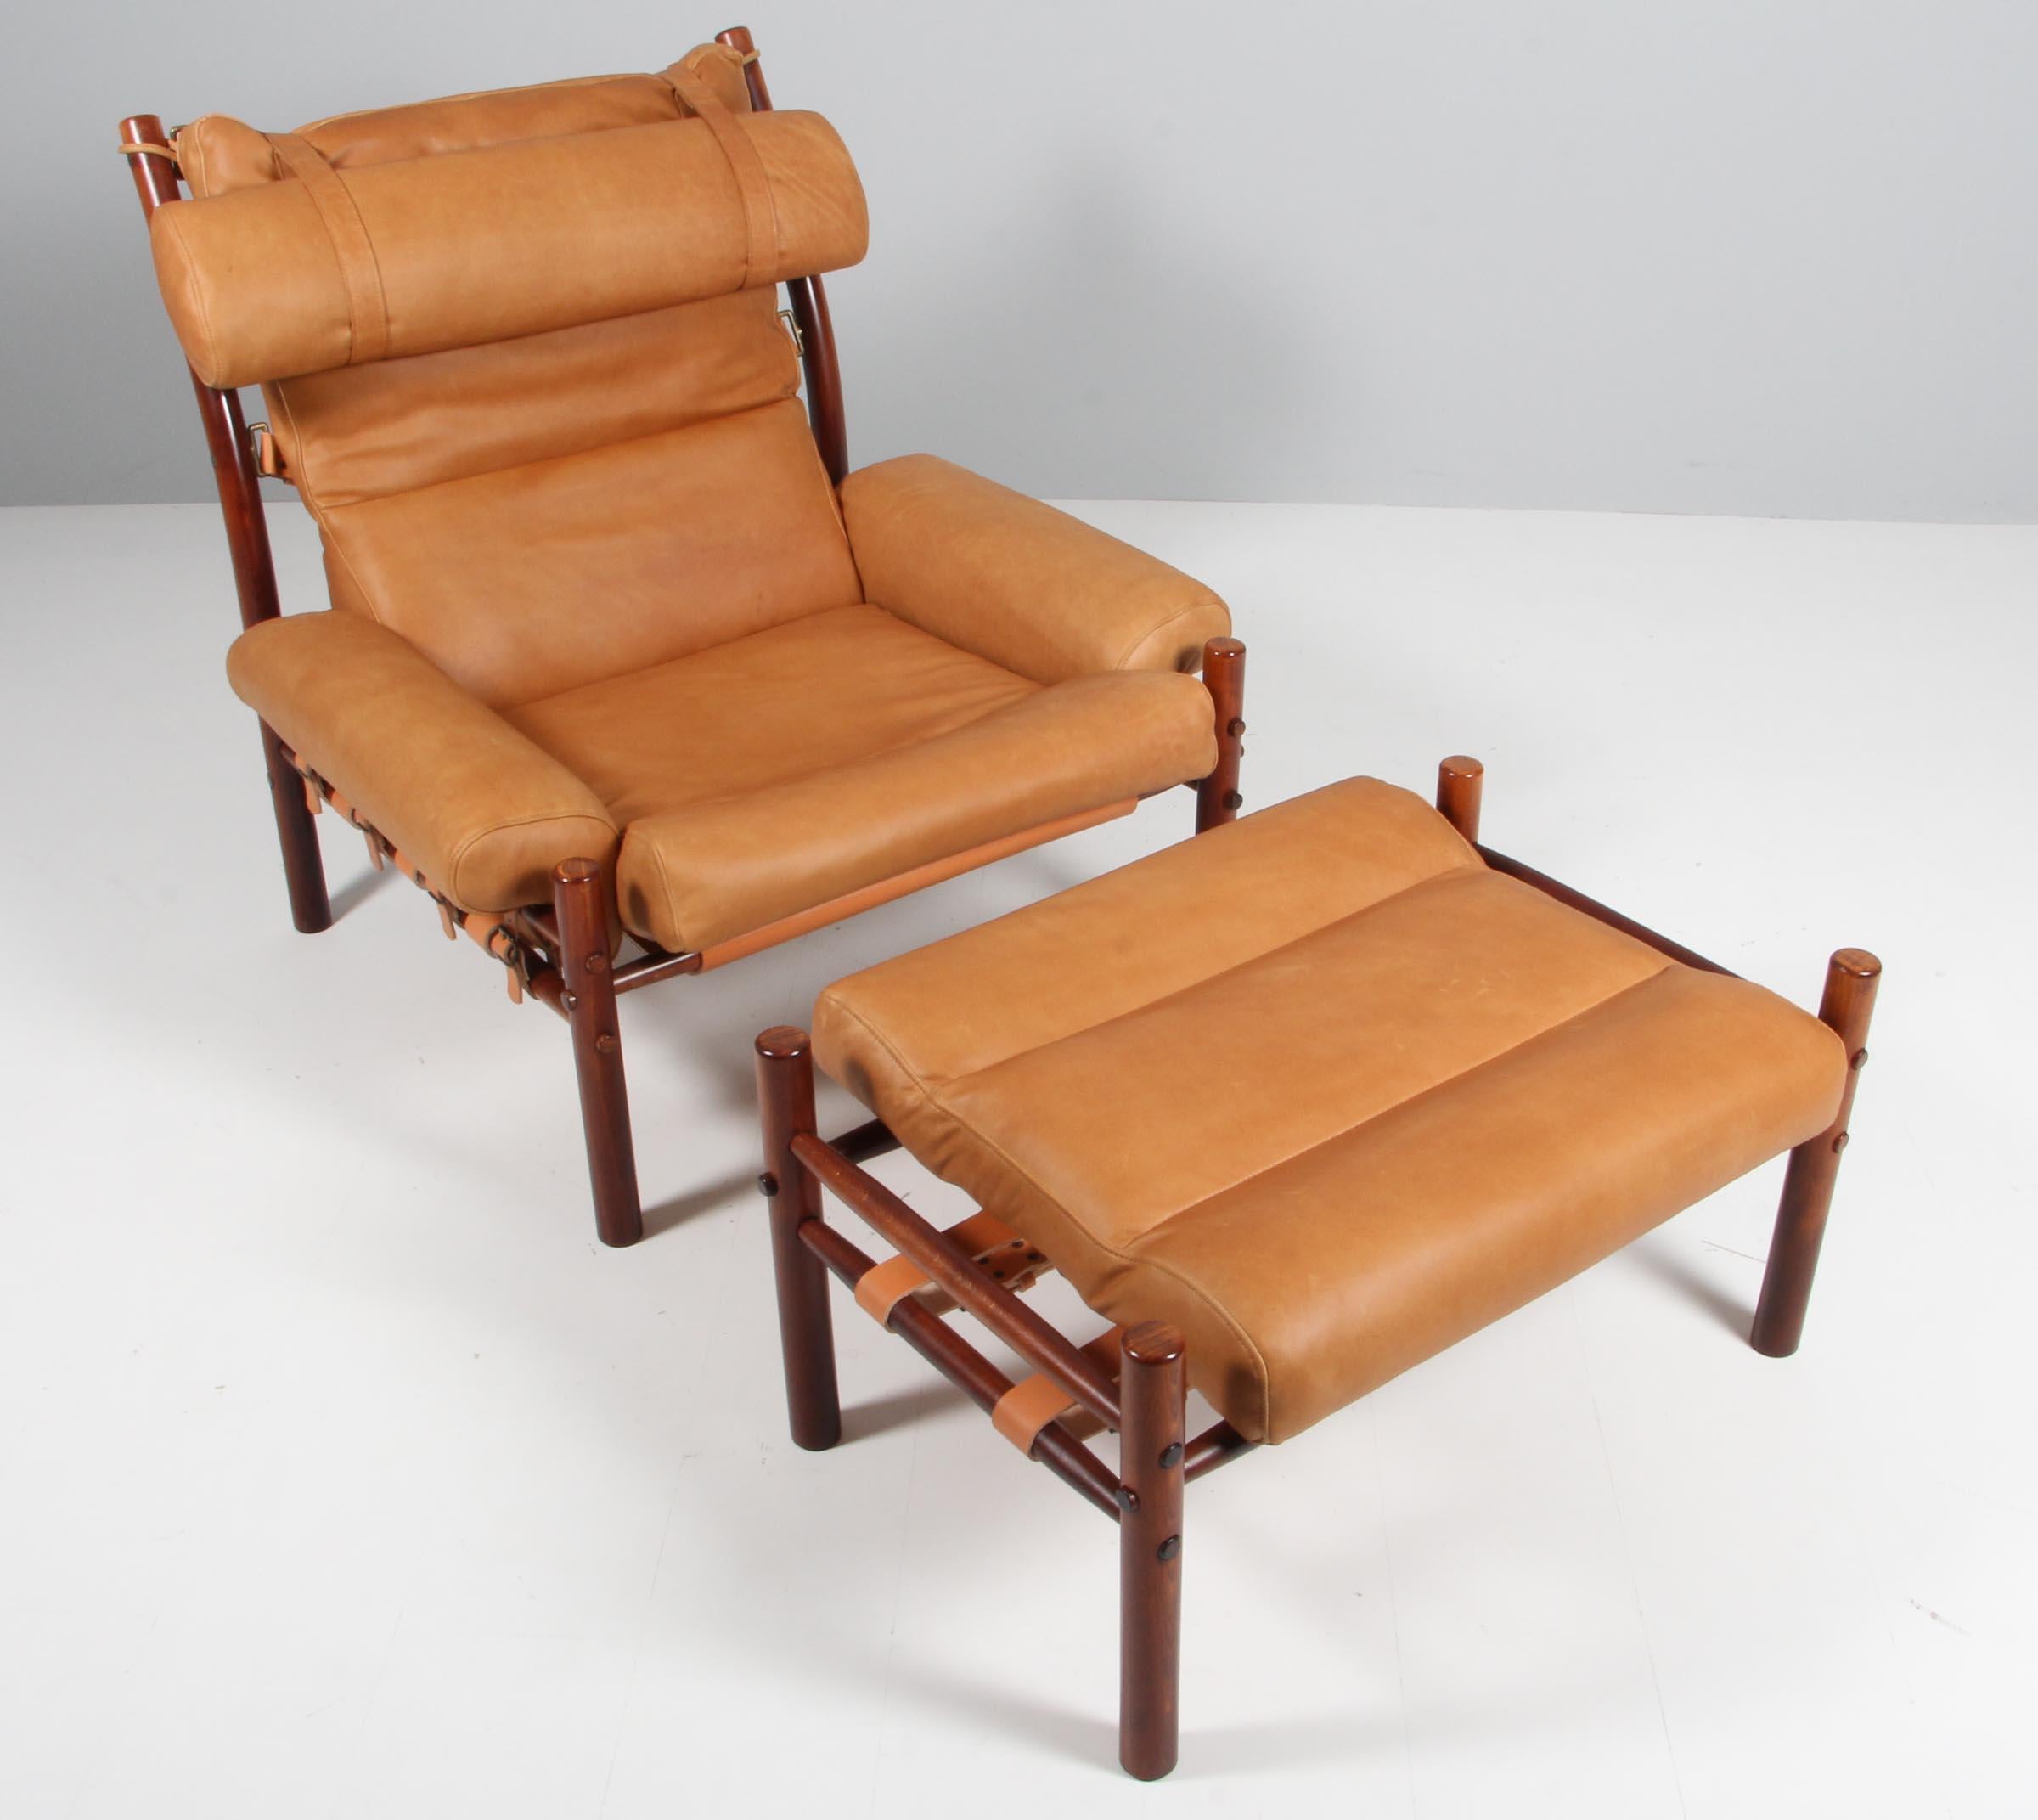 Arne Norell, 'Inca' lounge chair with ottoman, leather, beech, Sweden, 1965.

The iconic 'Inca' lounge chair with ottoman in new upholstered tan aniline leather, designed by Arne Norell. The back features thick buffalo leather. The light cognac